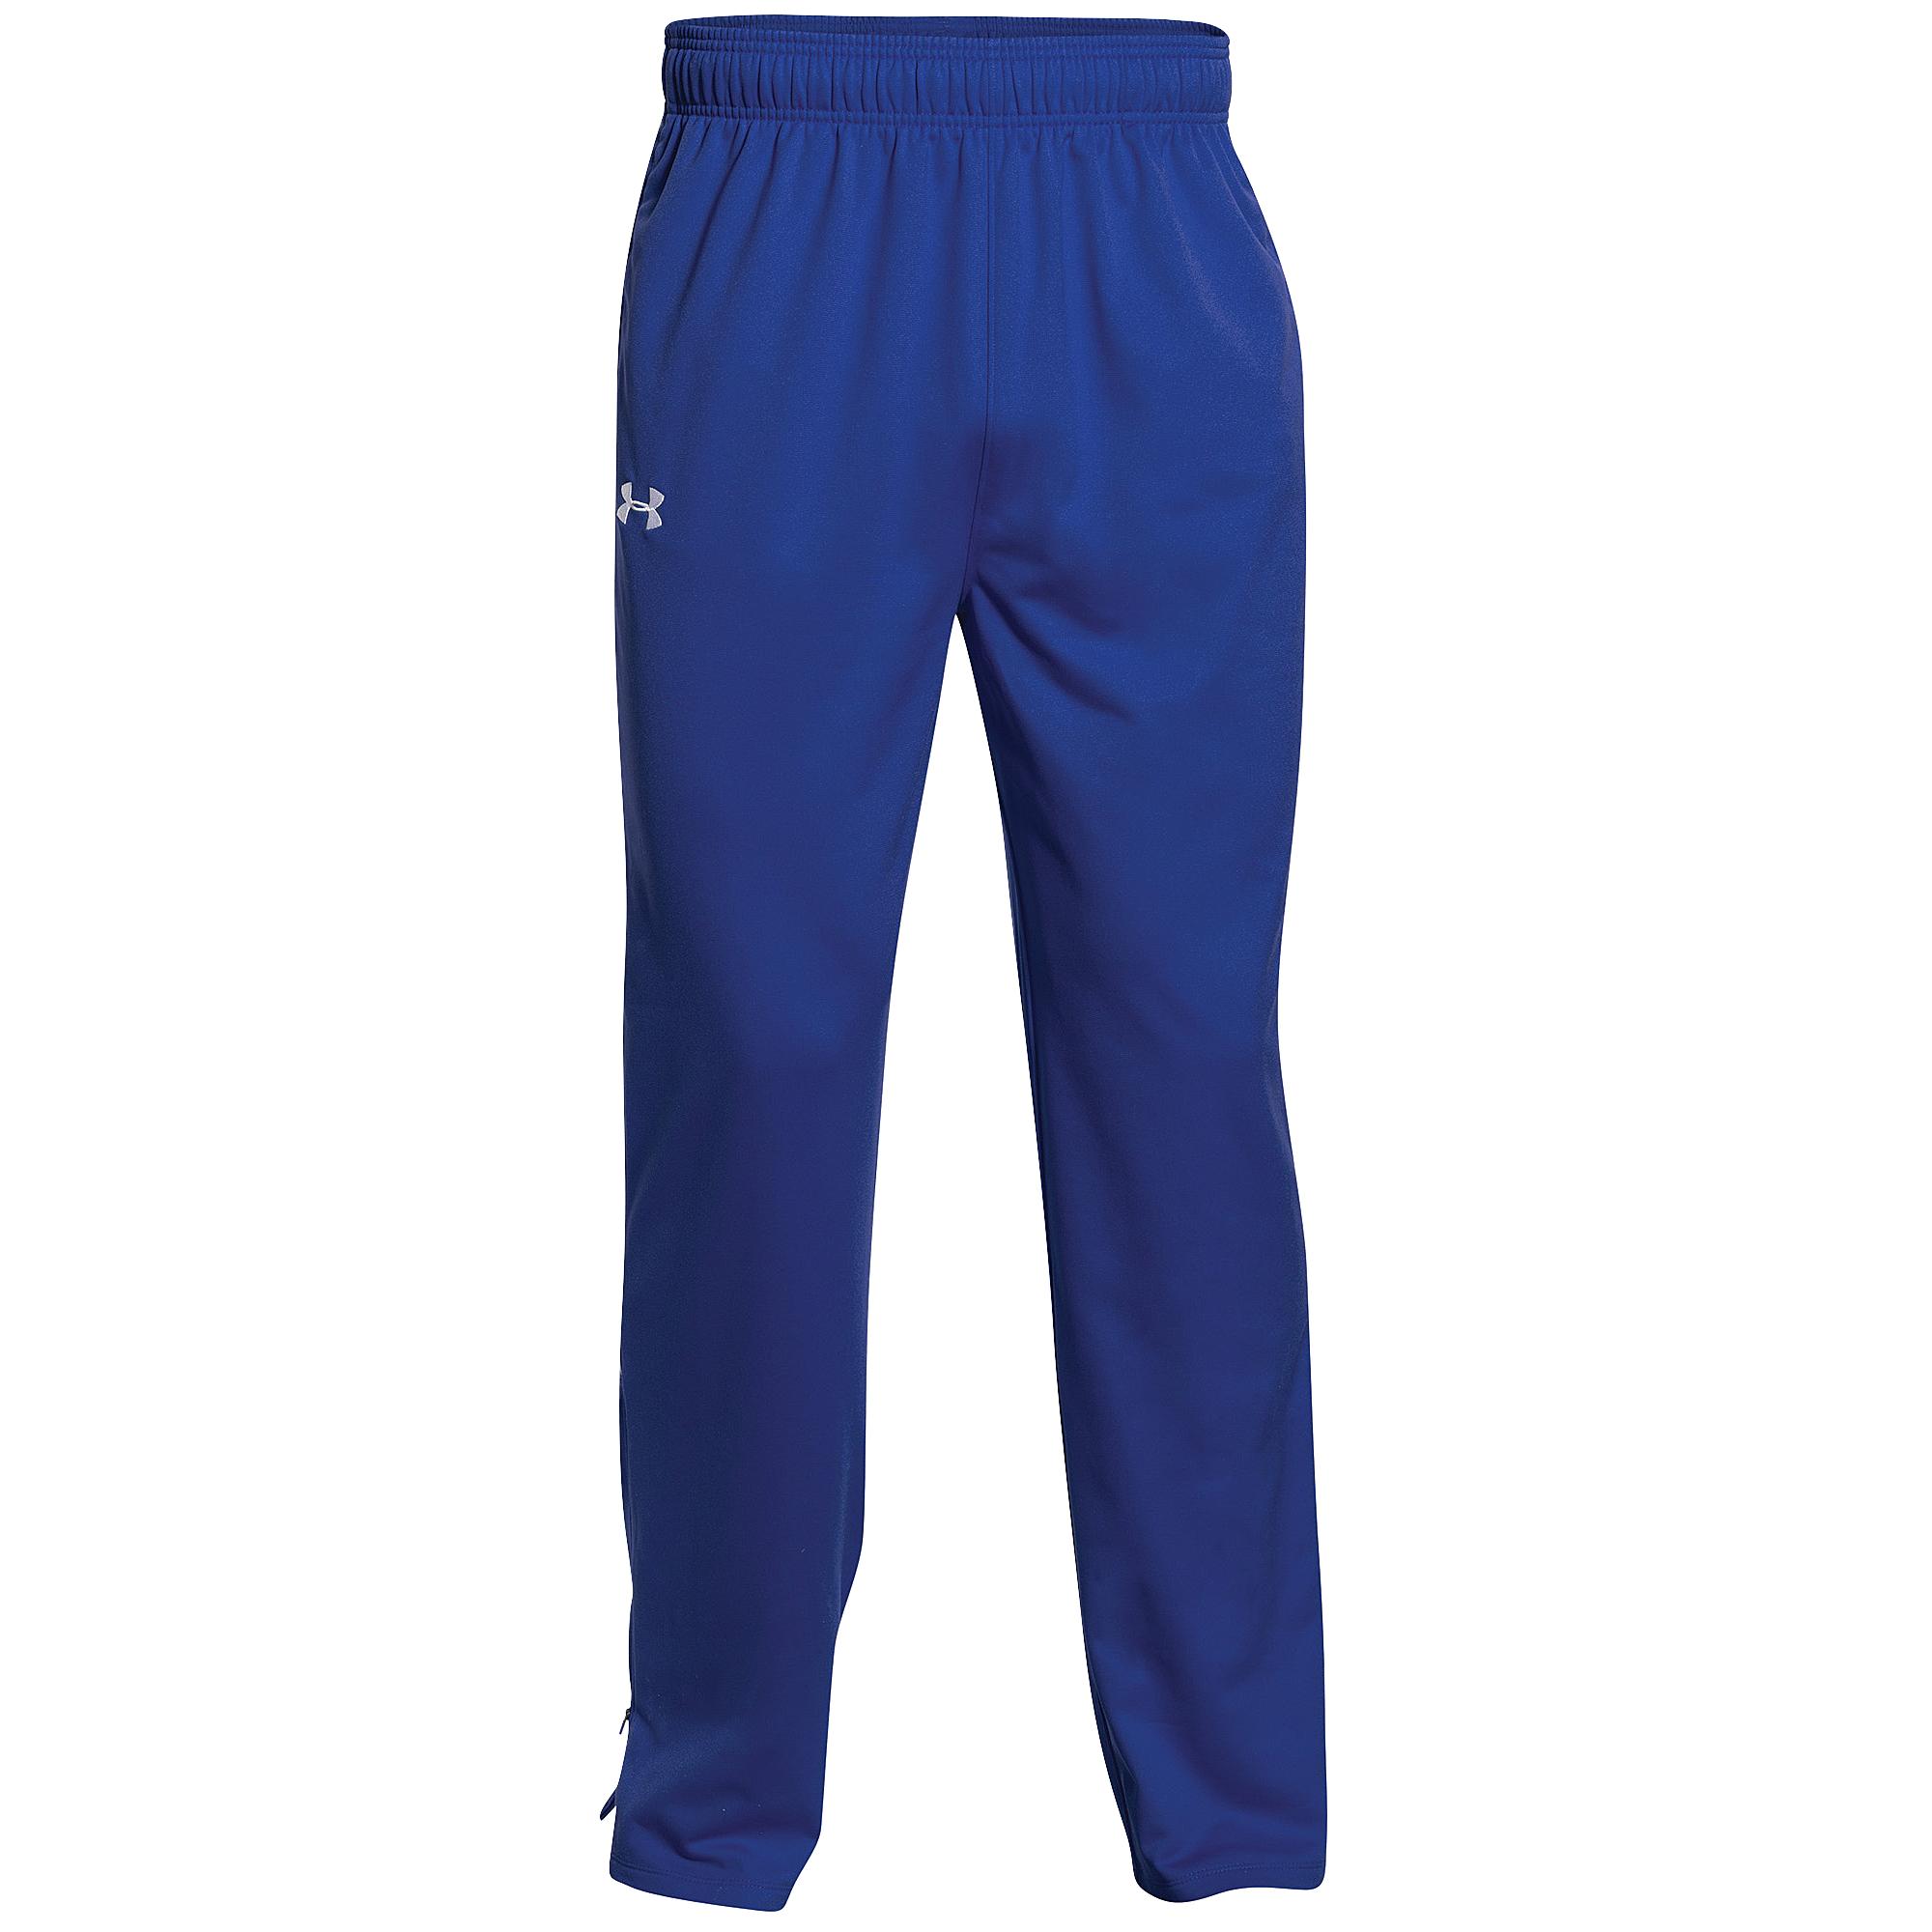 Under Armour Team Rival Knit Warm-up Pants in Blue for Men - Lyst